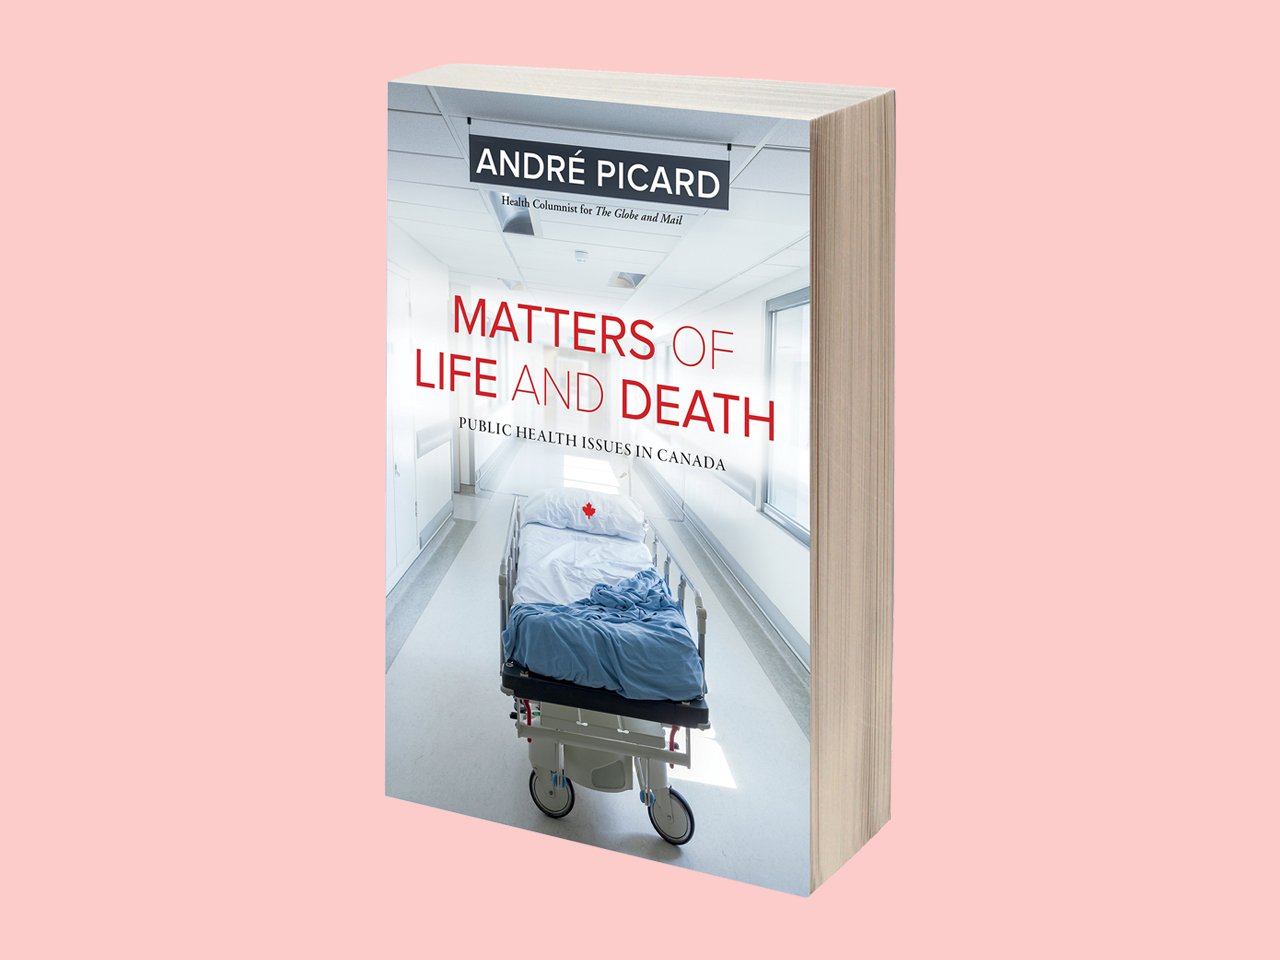 Matters of Life and Death: Public Heath Issues in Canada by André Picard, $23.